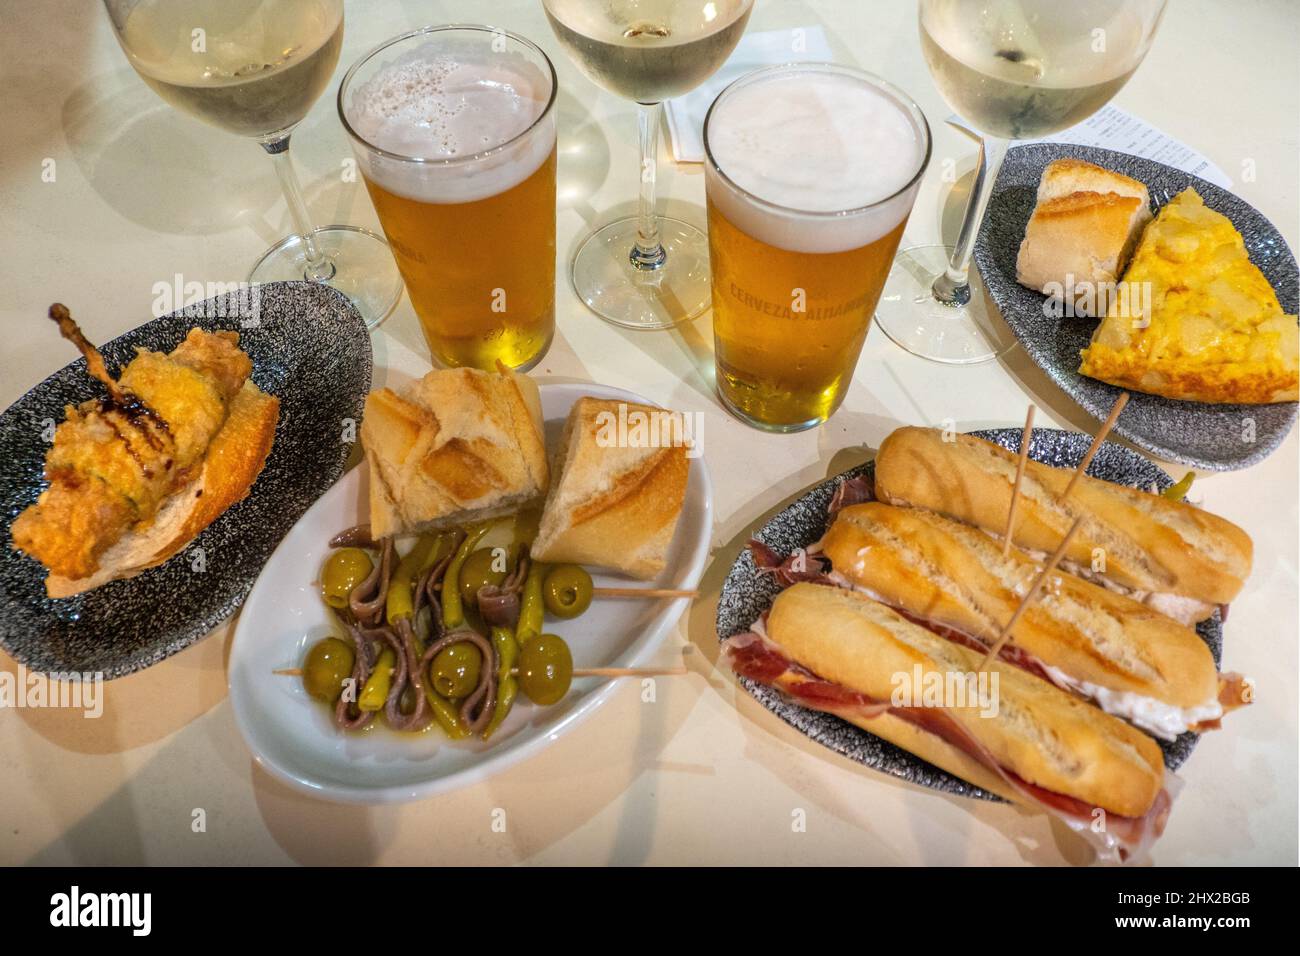 Spain, Basque country, Guipuzcoa, Food, Pintxos with Txacoi wine and beer, at Zarrauz. Stock Photo